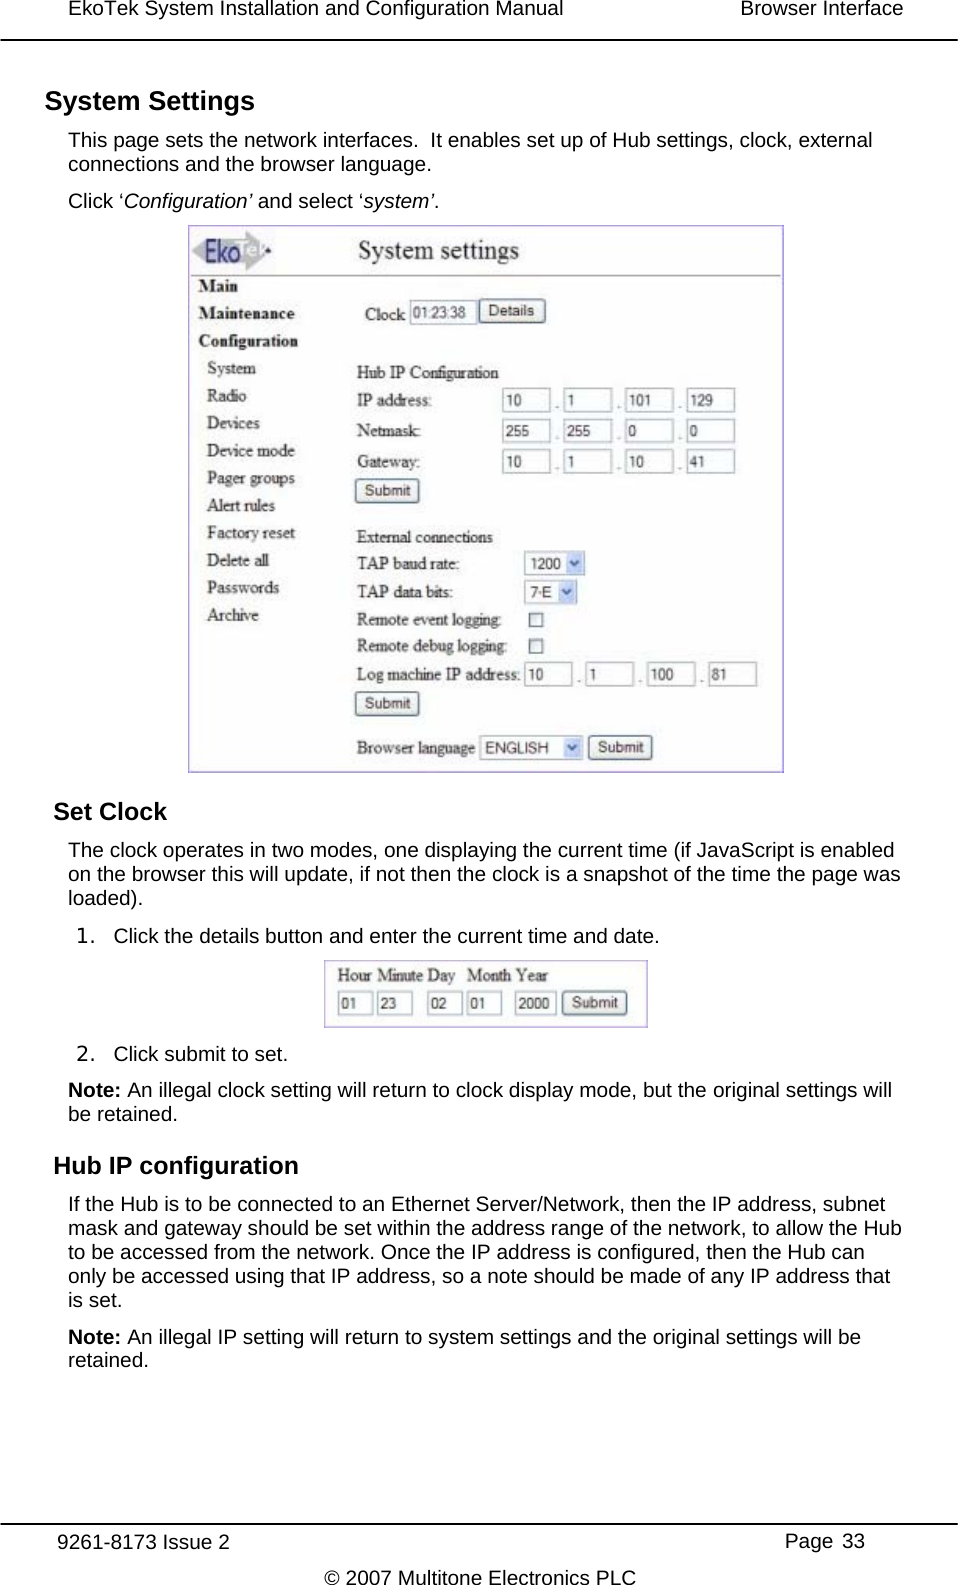 EkoTek System Installation and Configuration Manual  Browser Interface  System Settings This page sets the network interfaces.  It enables set up of Hub settings, clock, external connections and the browser language. Click ‘Configuration’ and select ‘system’.  Set Clock The clock operates in two modes, one displaying the current time (if JavaScript is enabled on the browser this will update, if not then the clock is a snapshot of the time the page was loaded). 1.  Click the details button and enter the current time and date.  2.  Click submit to set. Note: An illegal clock setting will return to clock display mode, but the original settings will be retained. Hub IP configuration If the Hub is to be connected to an Ethernet Server/Network, then the IP address, subnet mask and gateway should be set within the address range of the network, to allow the Hub to be accessed from the network. Once the IP address is configured, then the Hub can only be accessed using that IP address, so a note should be made of any IP address that is set. Note: An illegal IP setting will return to system settings and the original settings will be retained. 9261-8173 Issue 2     Page 33 © 2007 Multitone Electronics PLC 